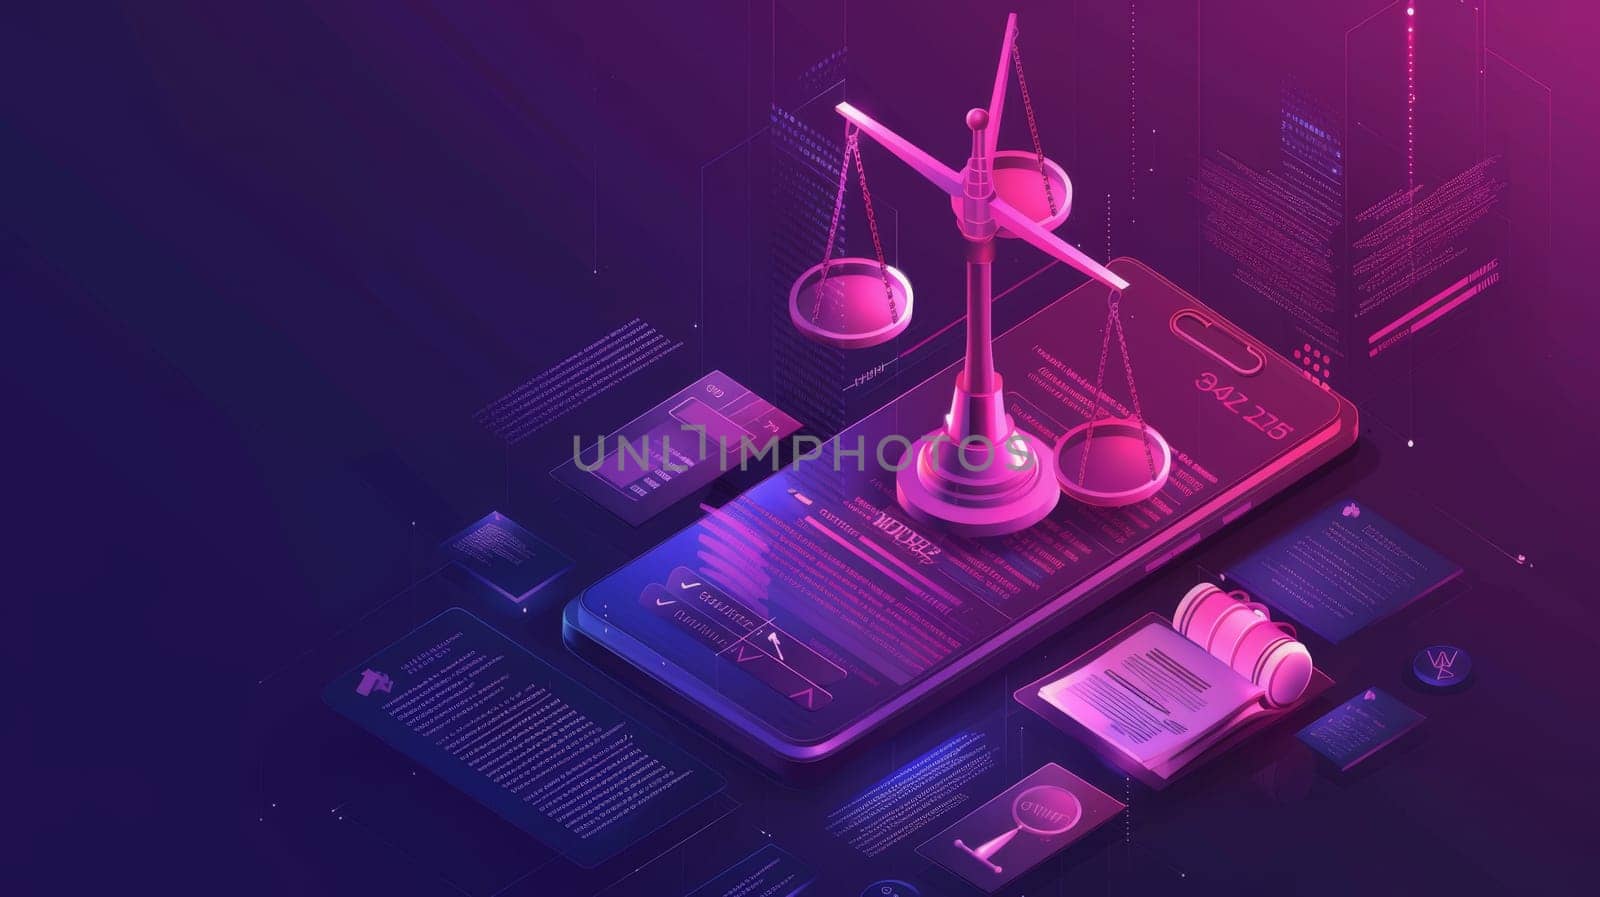 Isometric legal advice landing page. Online lawyer assistance for regulatory legal issues and compliance. 3D modern line art banner with scales, phone, and documents.